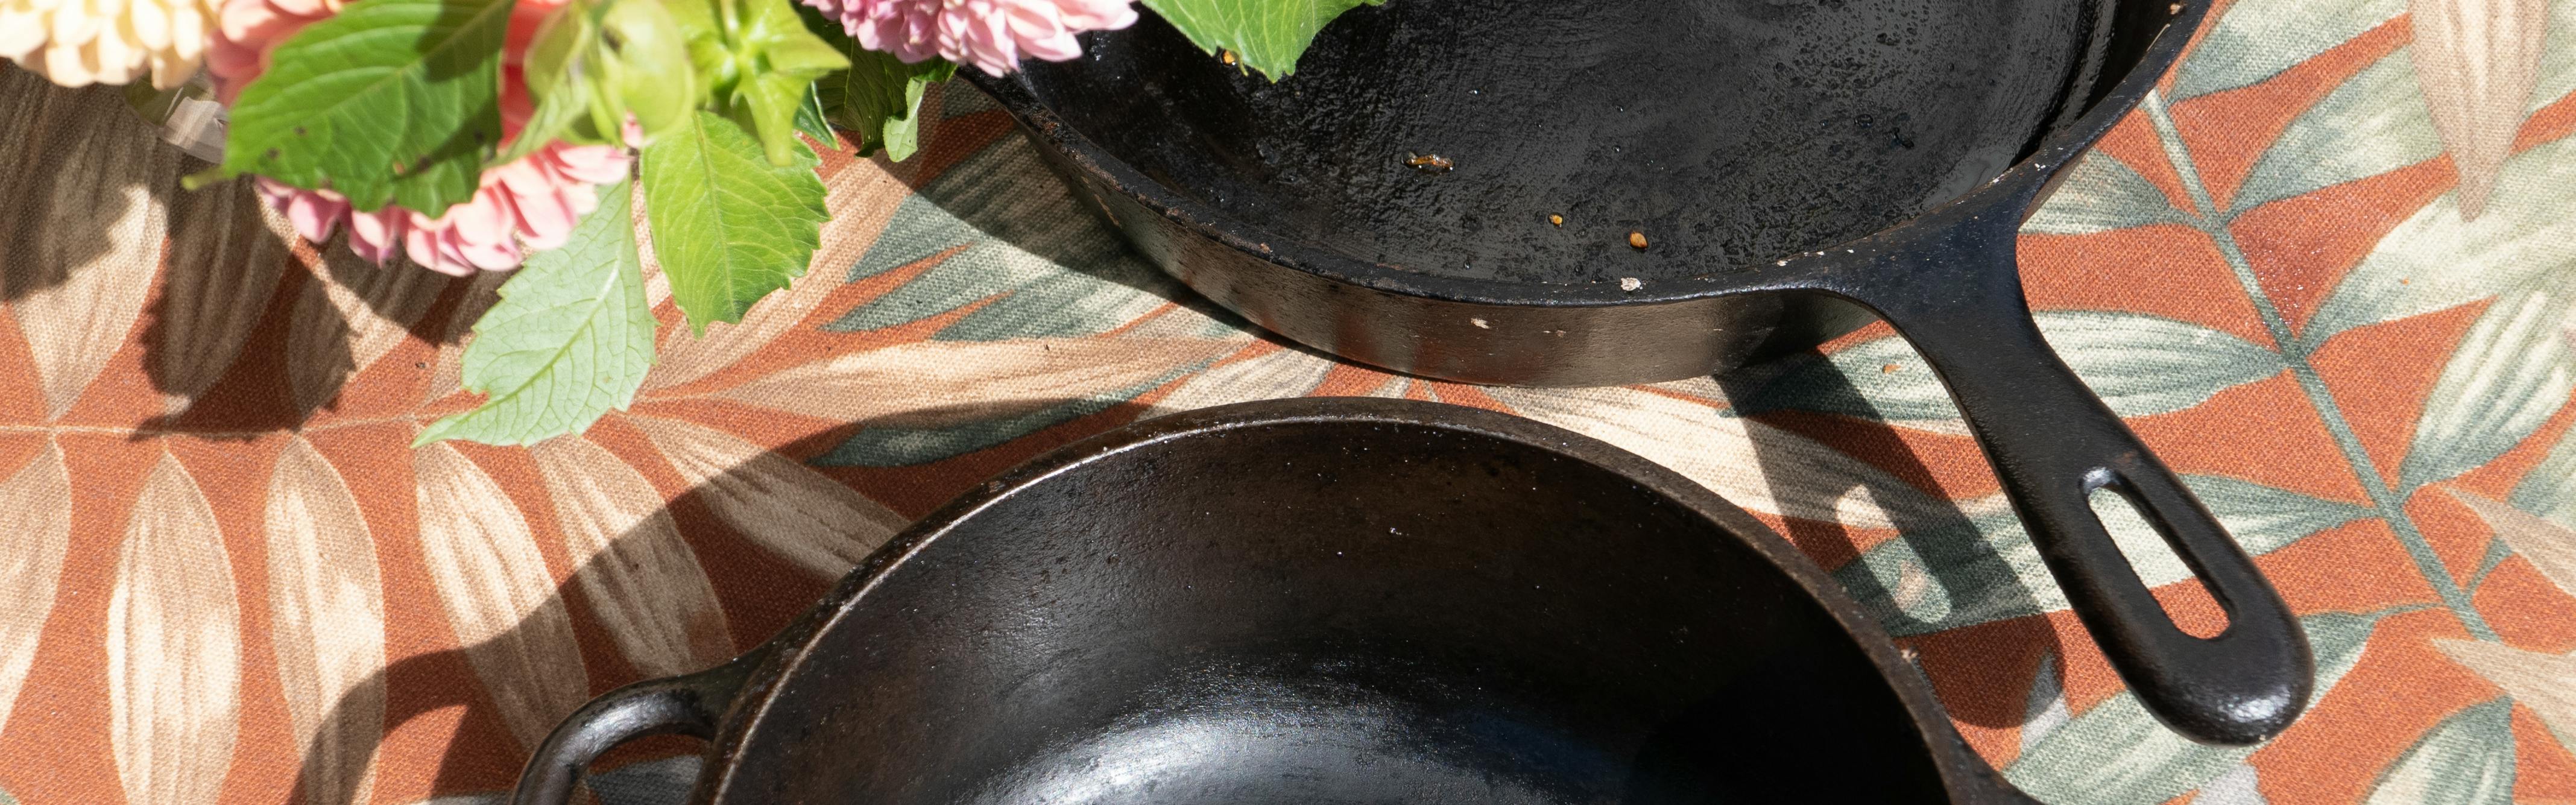 Cast iron cookware on a table